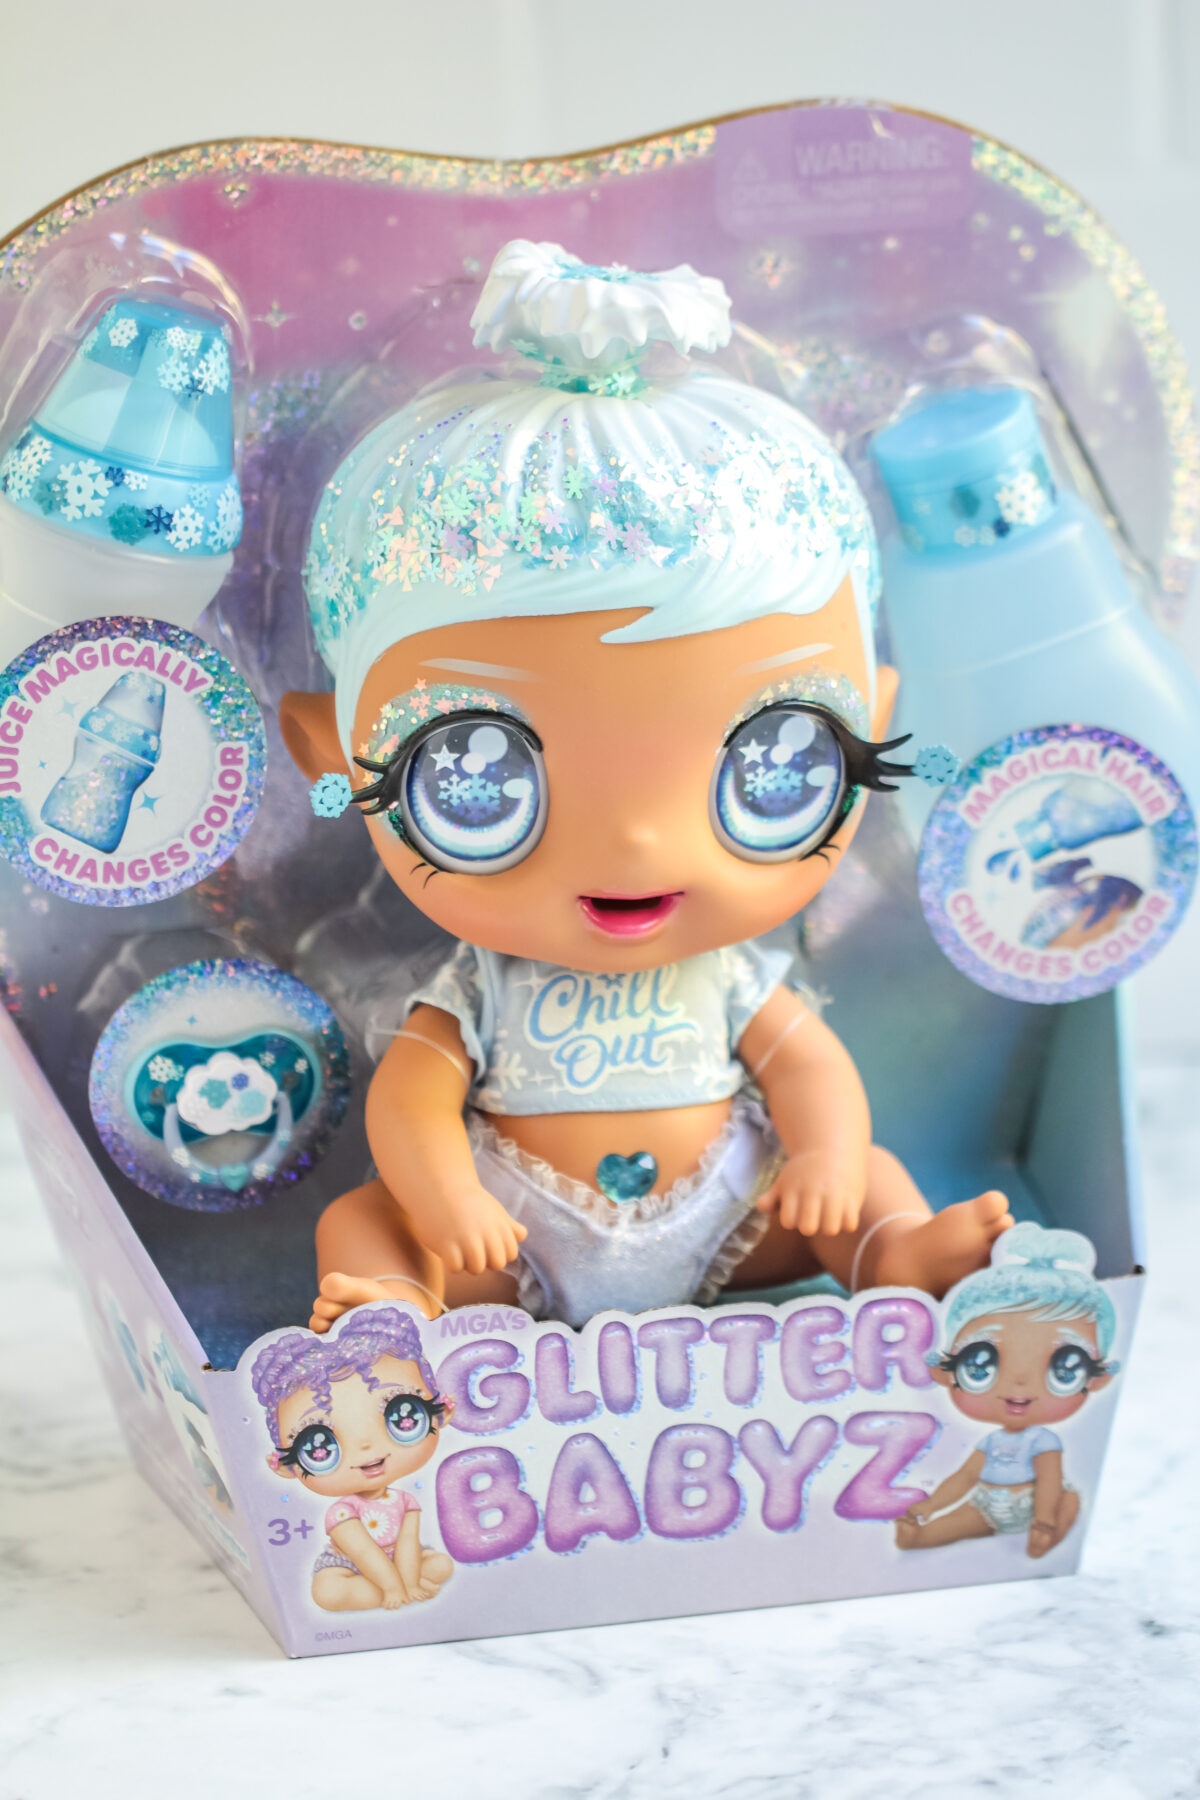 What's more precious than a baby doll with the prettiest features and sparkling eyes? MGA's Glitter Babyz are just that! 